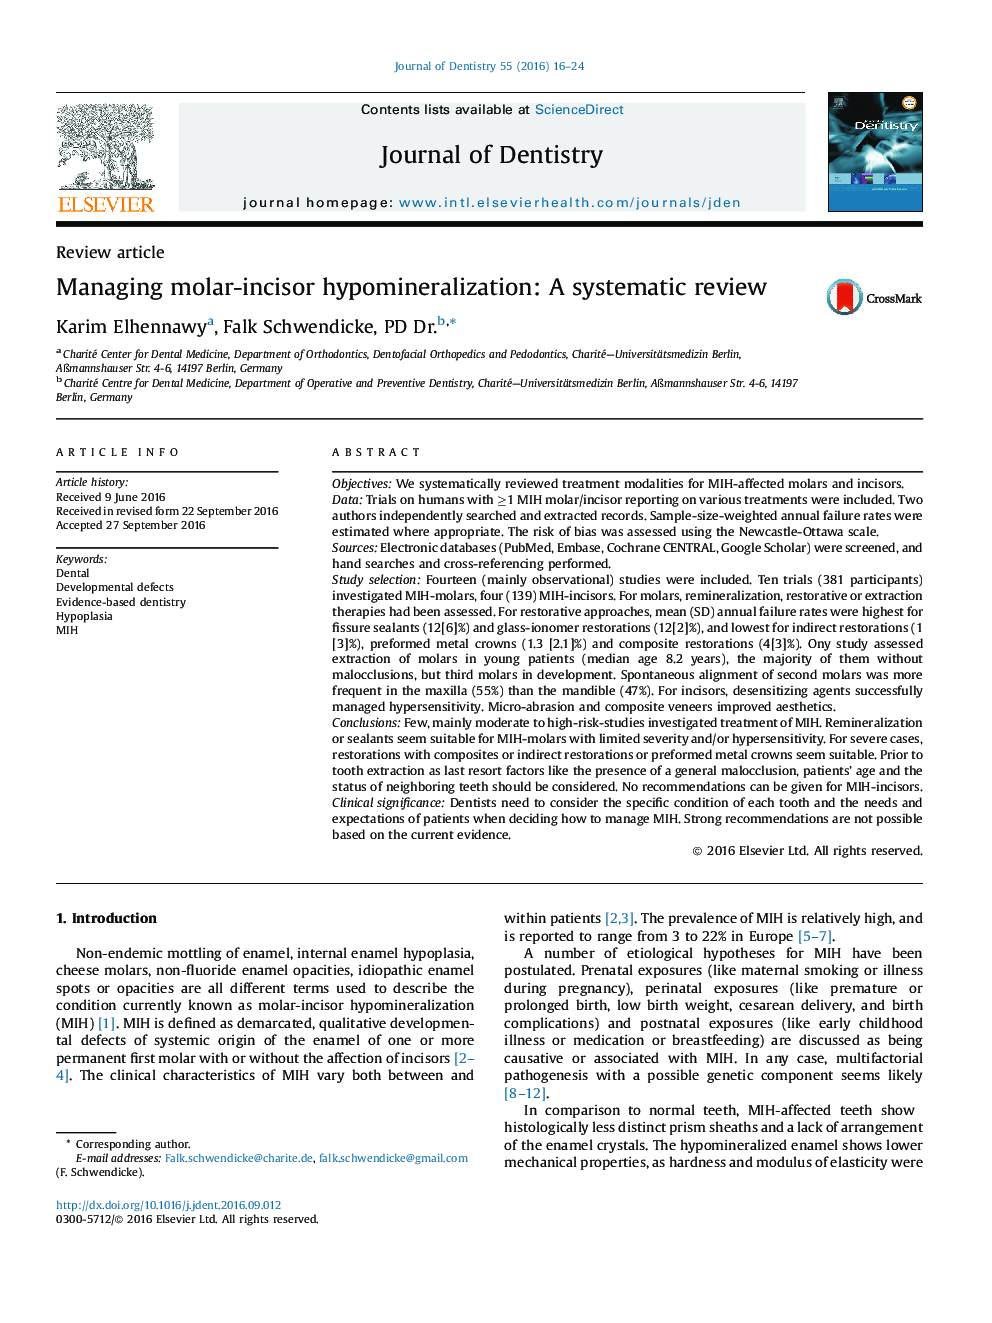 Managing molar-incisor hypomineralization: A systematic review